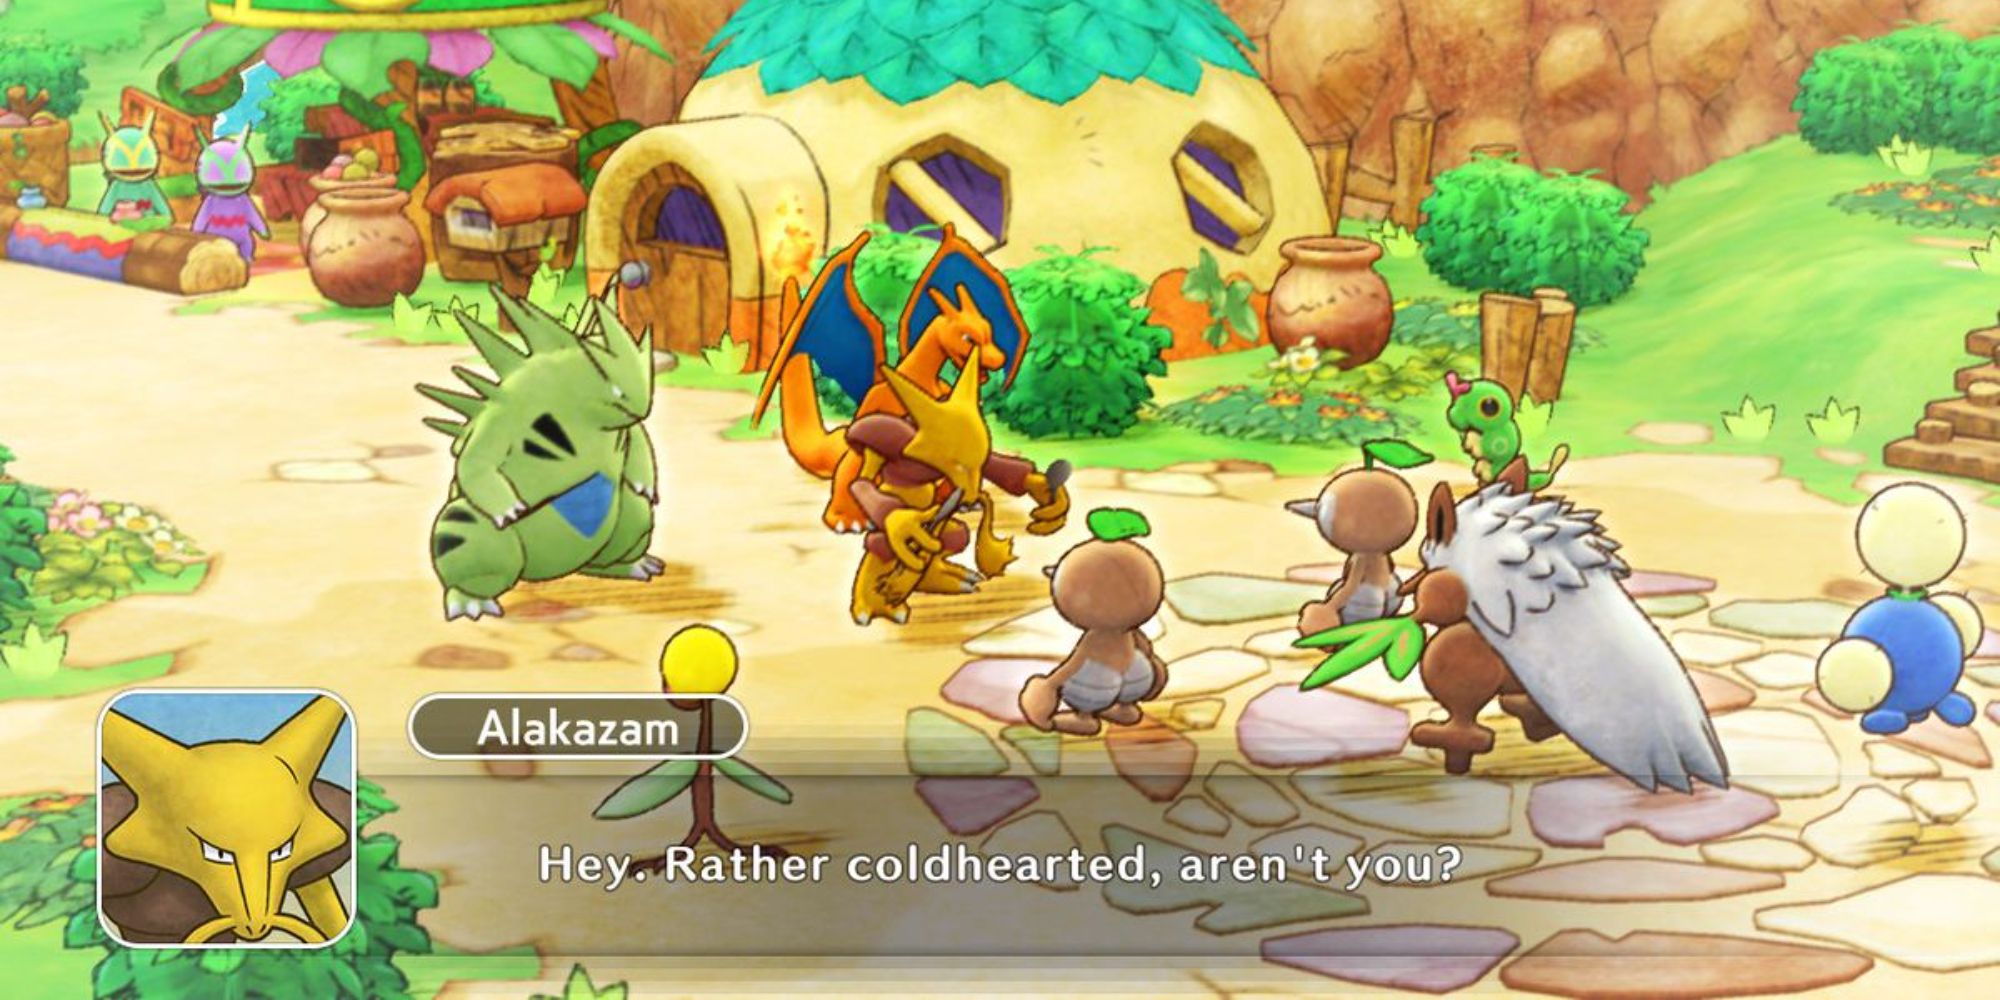 Shiftry's party confronting Tyranitar, Alakazam, and Charizard in Mystery Dungeon